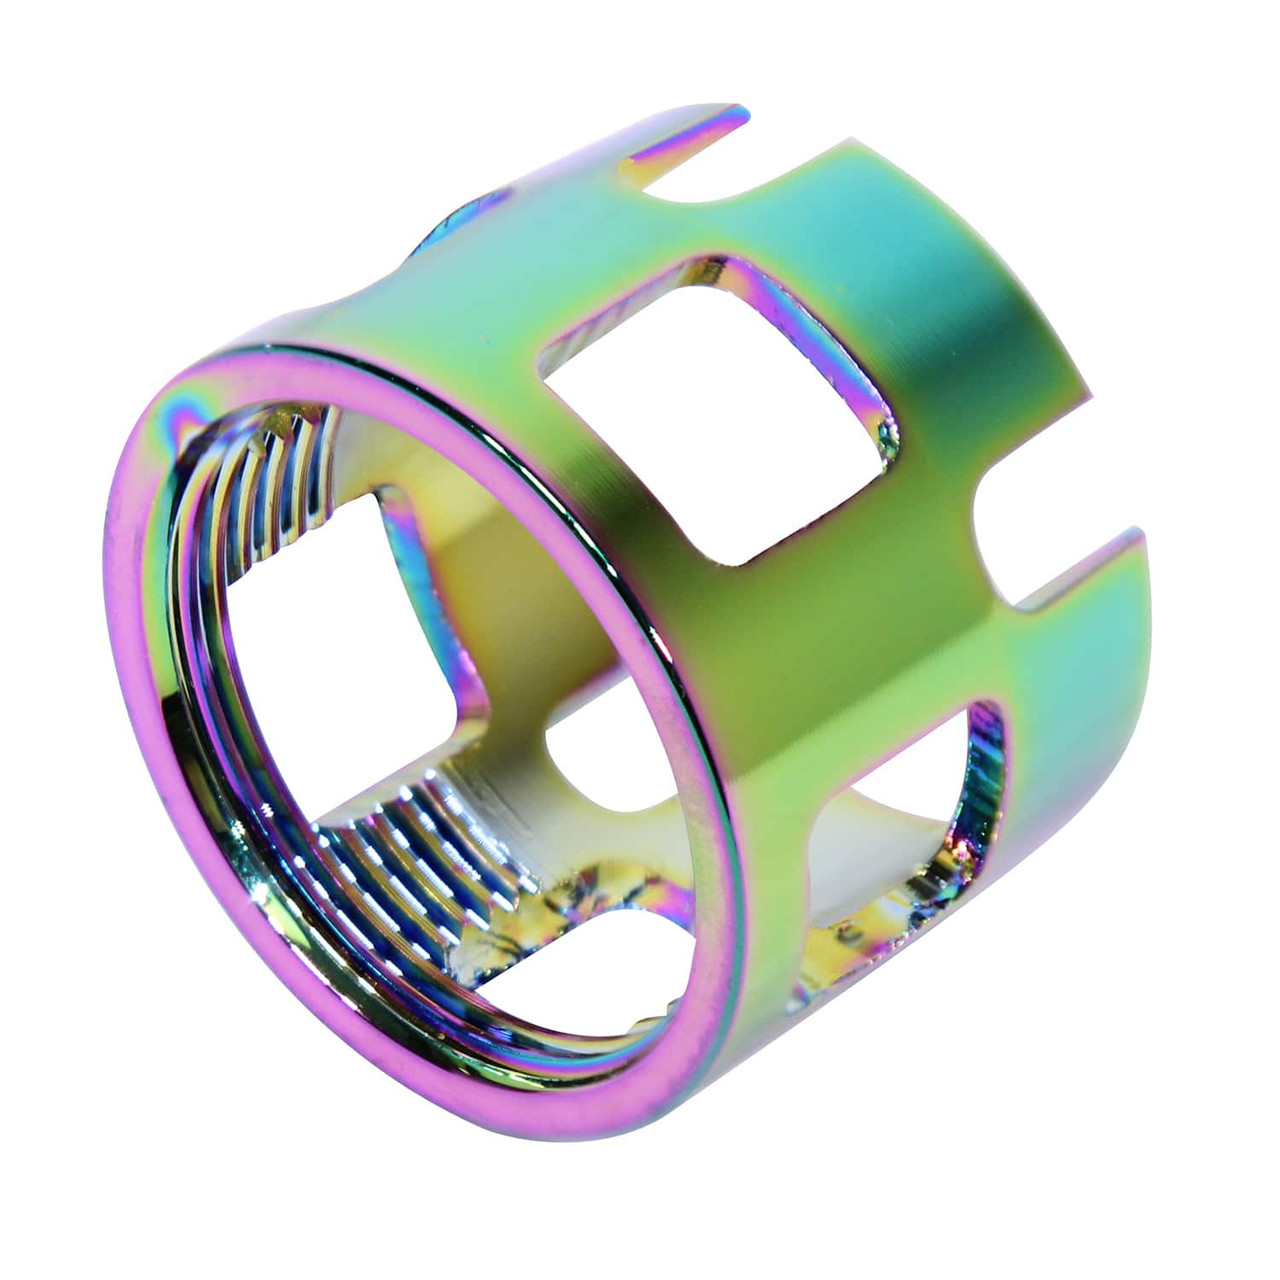 Guntec USA CASTLE-EXD-RPVD Extreme Duty Wide Castle Nut For Buffer Tube (Rainbow PVD Coated)